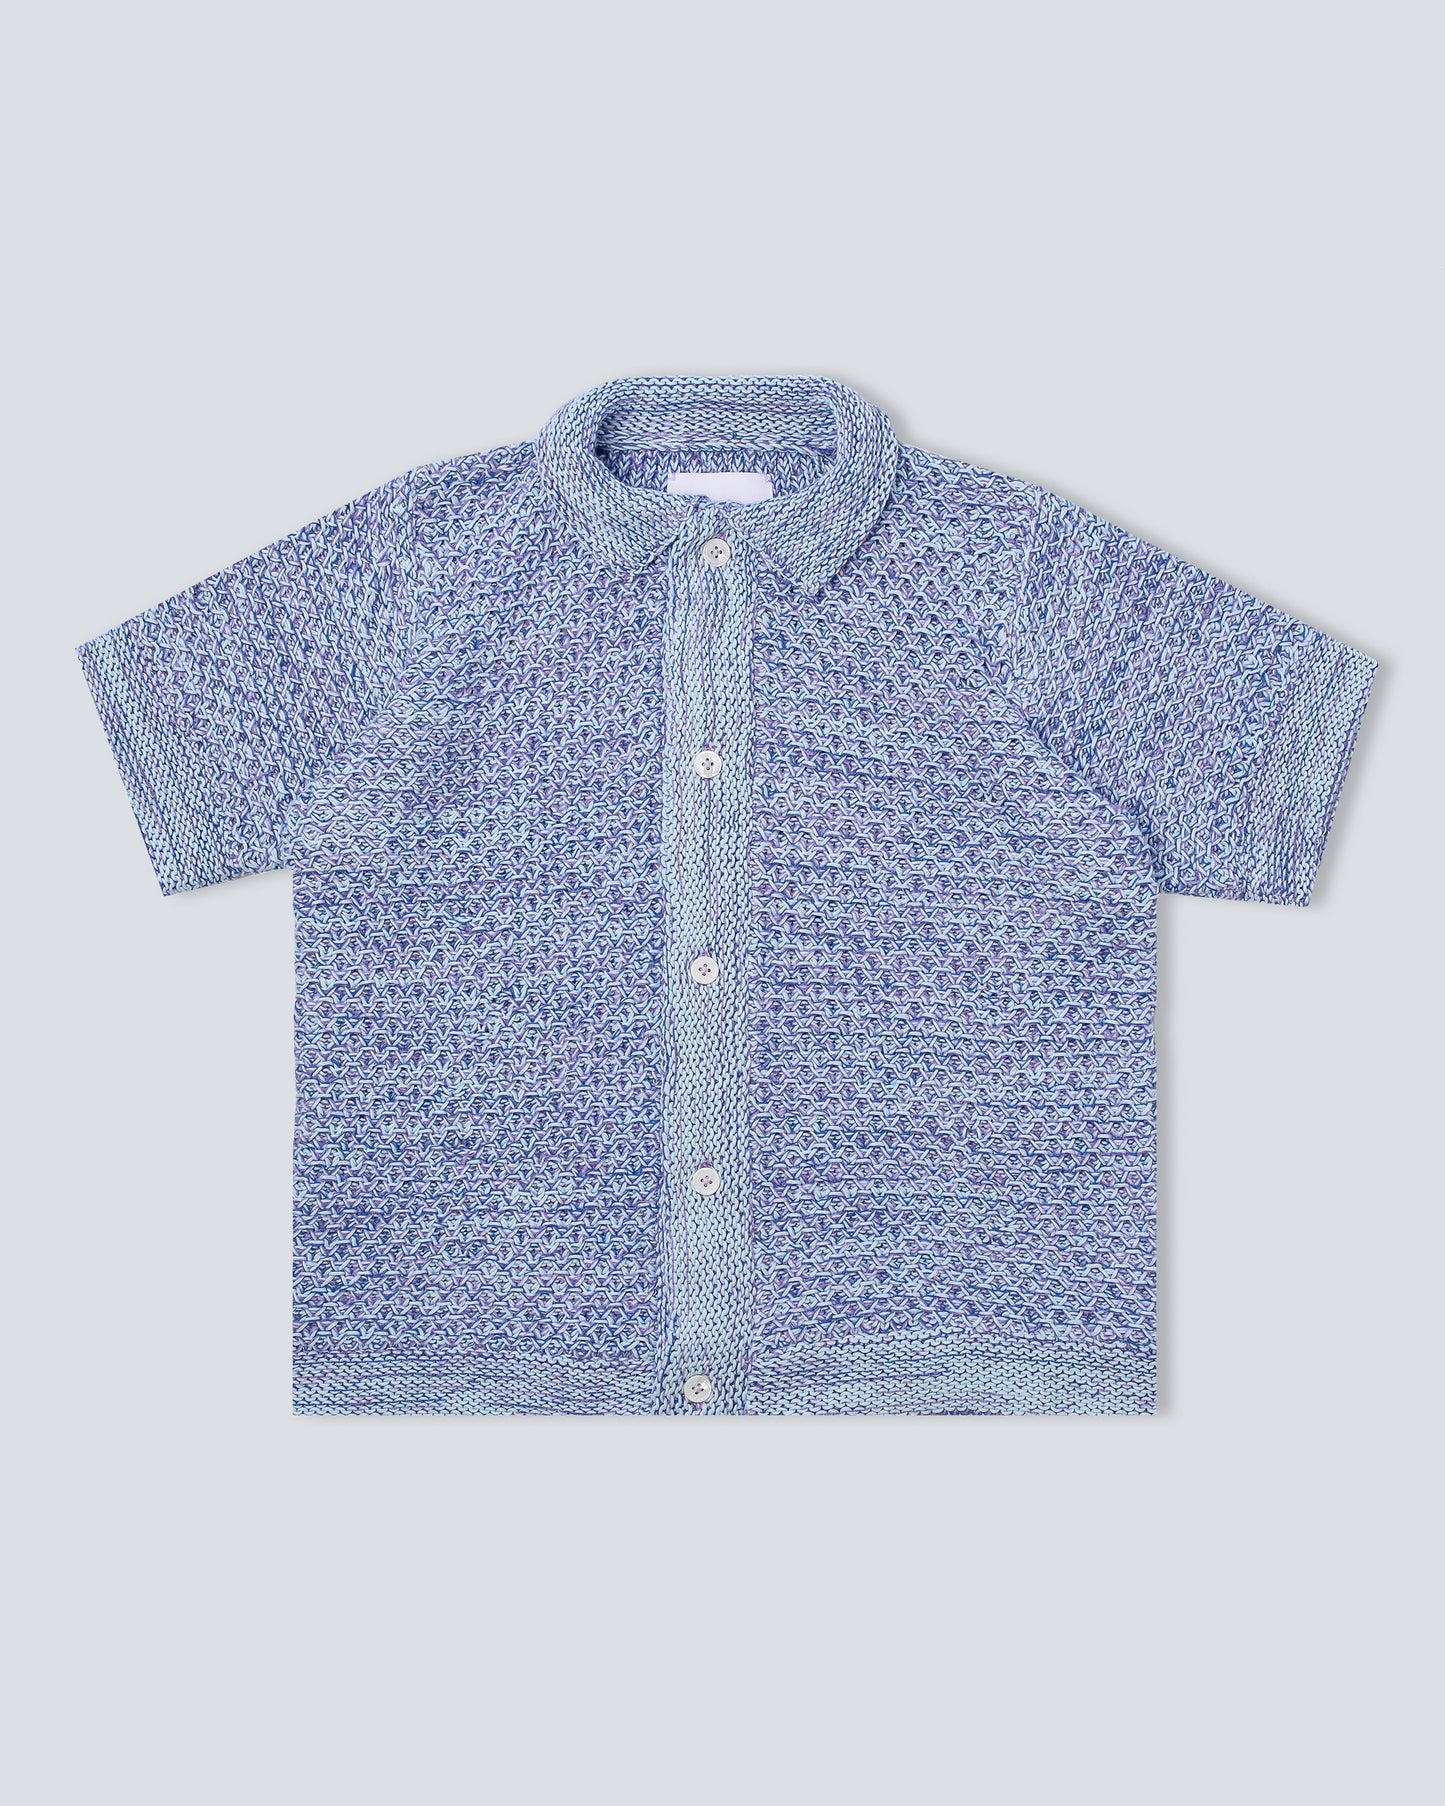 Purple Hand-Loomed Knitted Button Up Shirt